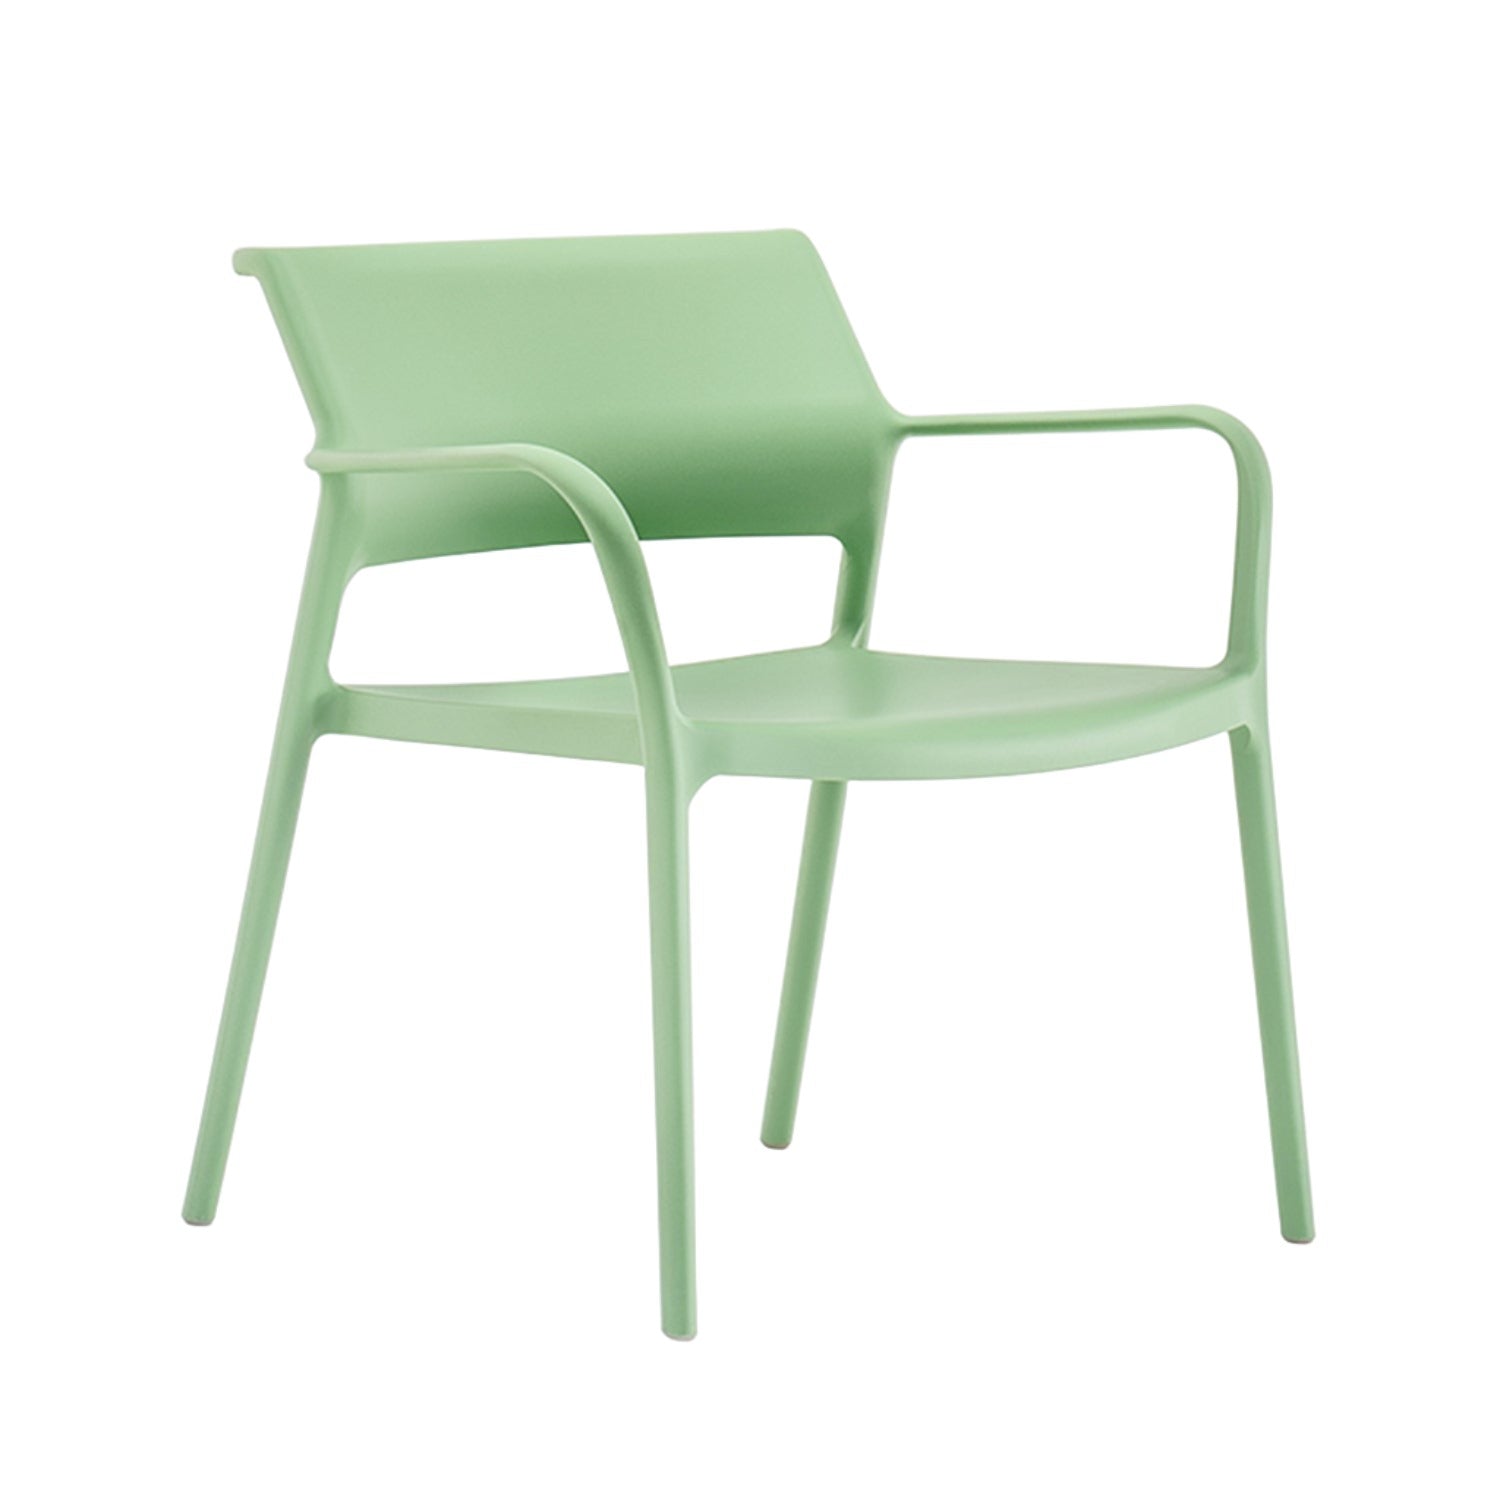 Pedrali Ara 316 Outdoor Lounge Chair in sage